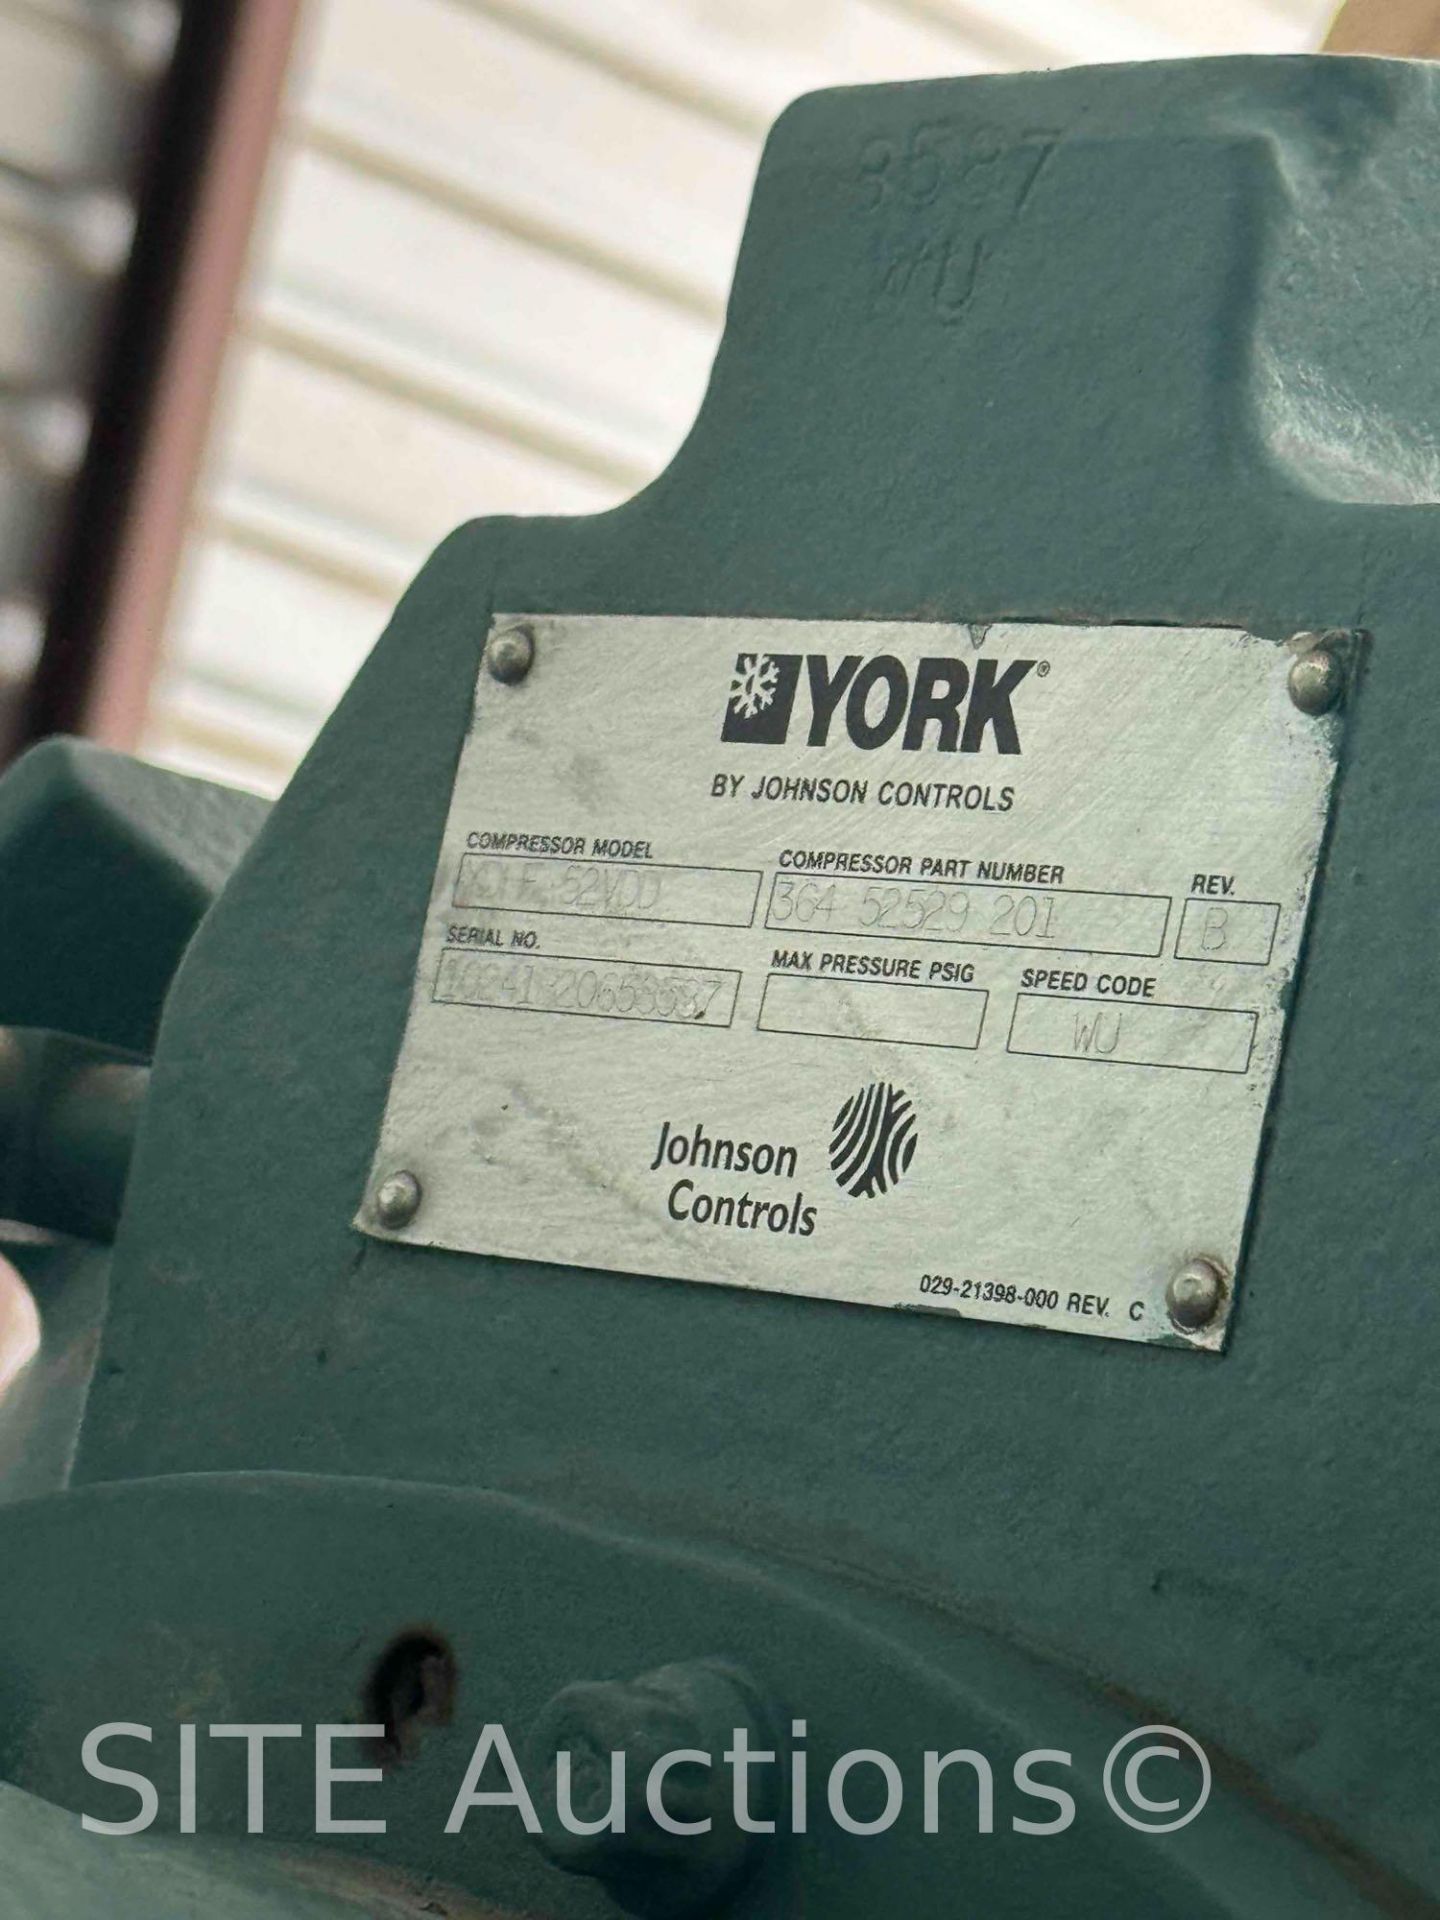 UNUSED 2012 York by Johnson Controls MaxE Centrifugal Chiller - Image 17 of 19